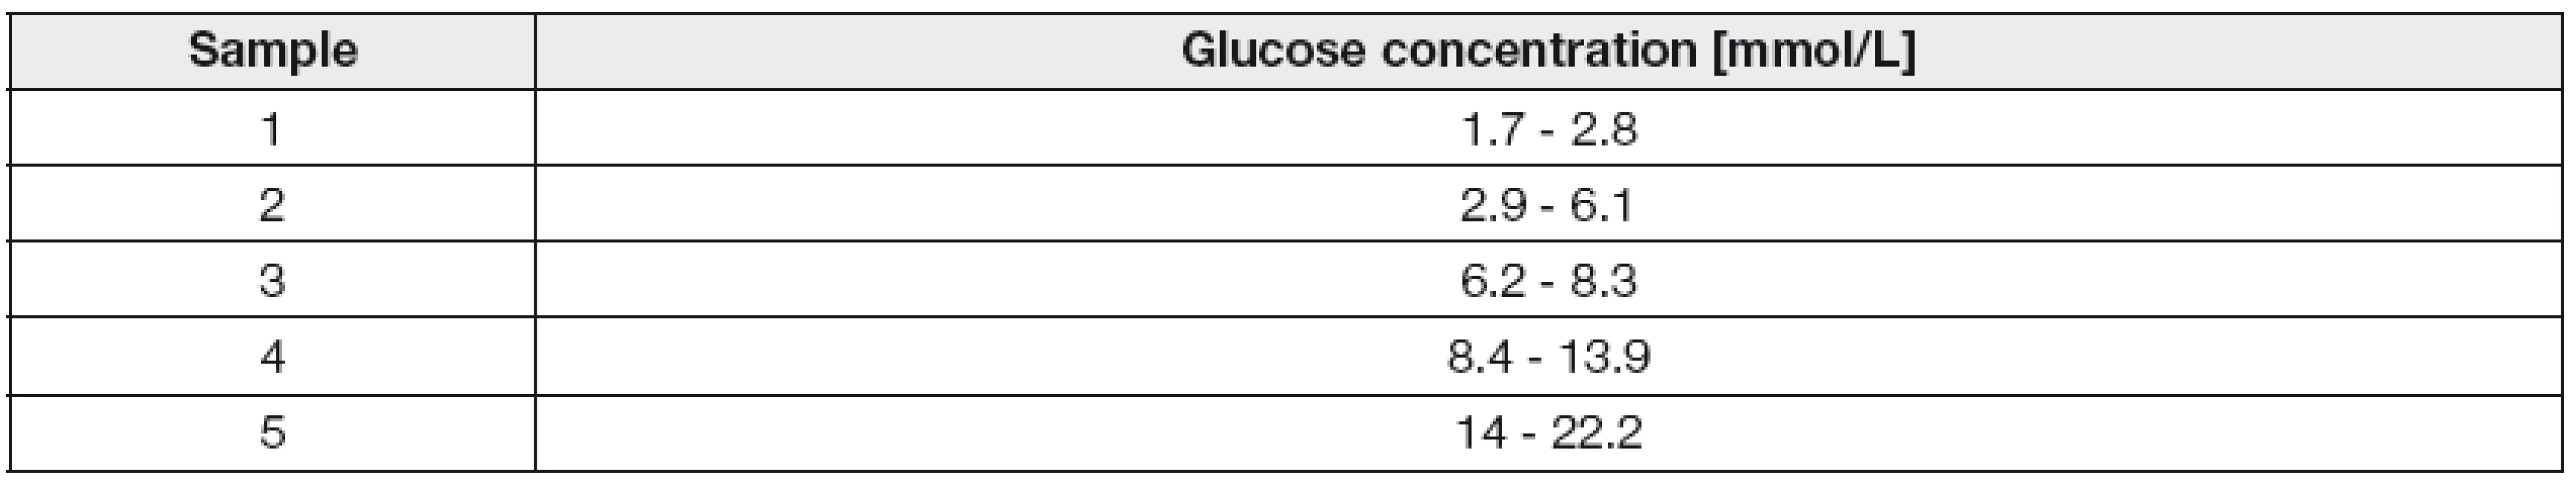 Interval of glucose concentrations for determining the repeatabilily according to ISO 15197.2013